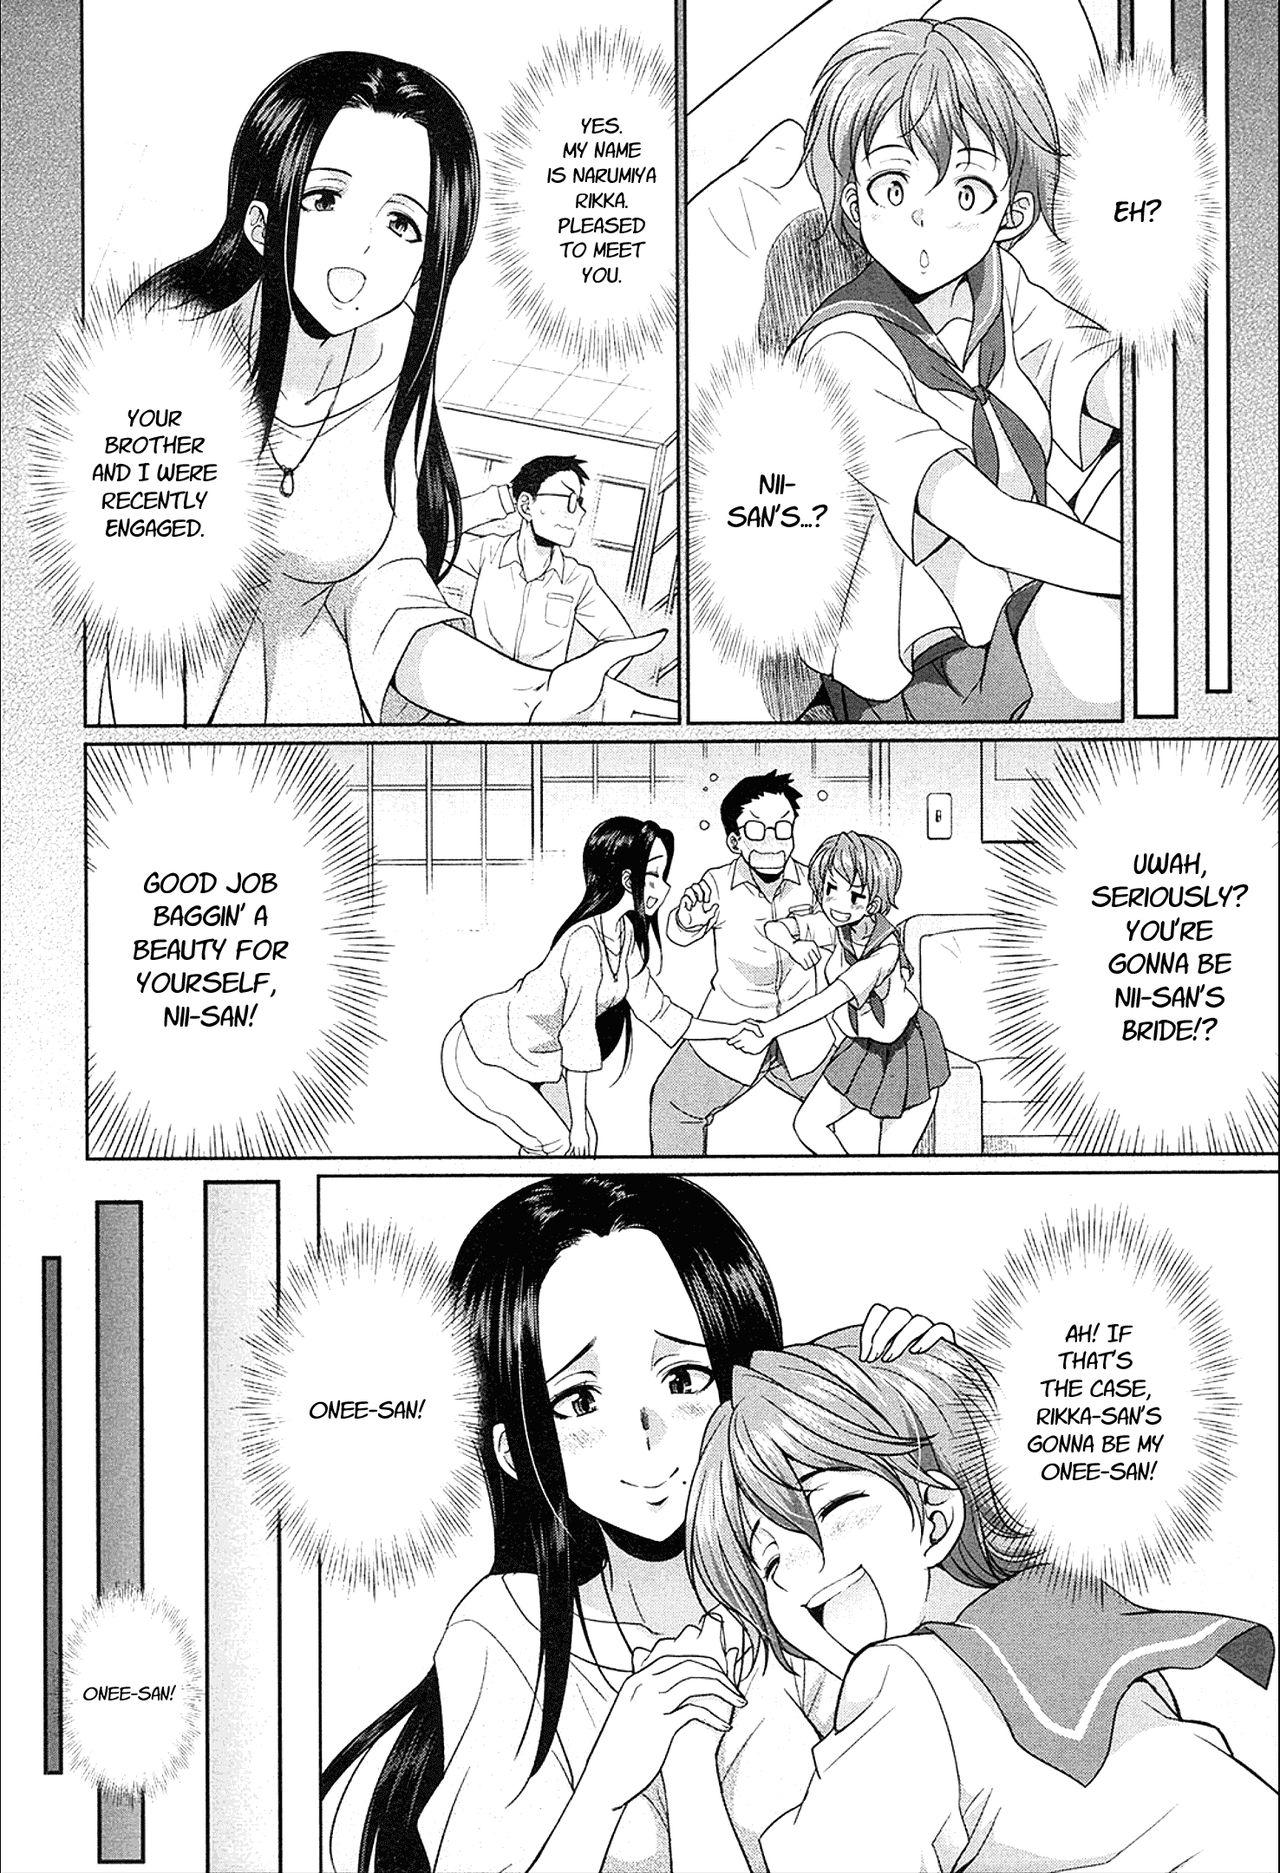 Swing Gishimai no Kankei The Relationship of the Sisters-in-Law Original Script Uncensored Pinay - Page 4